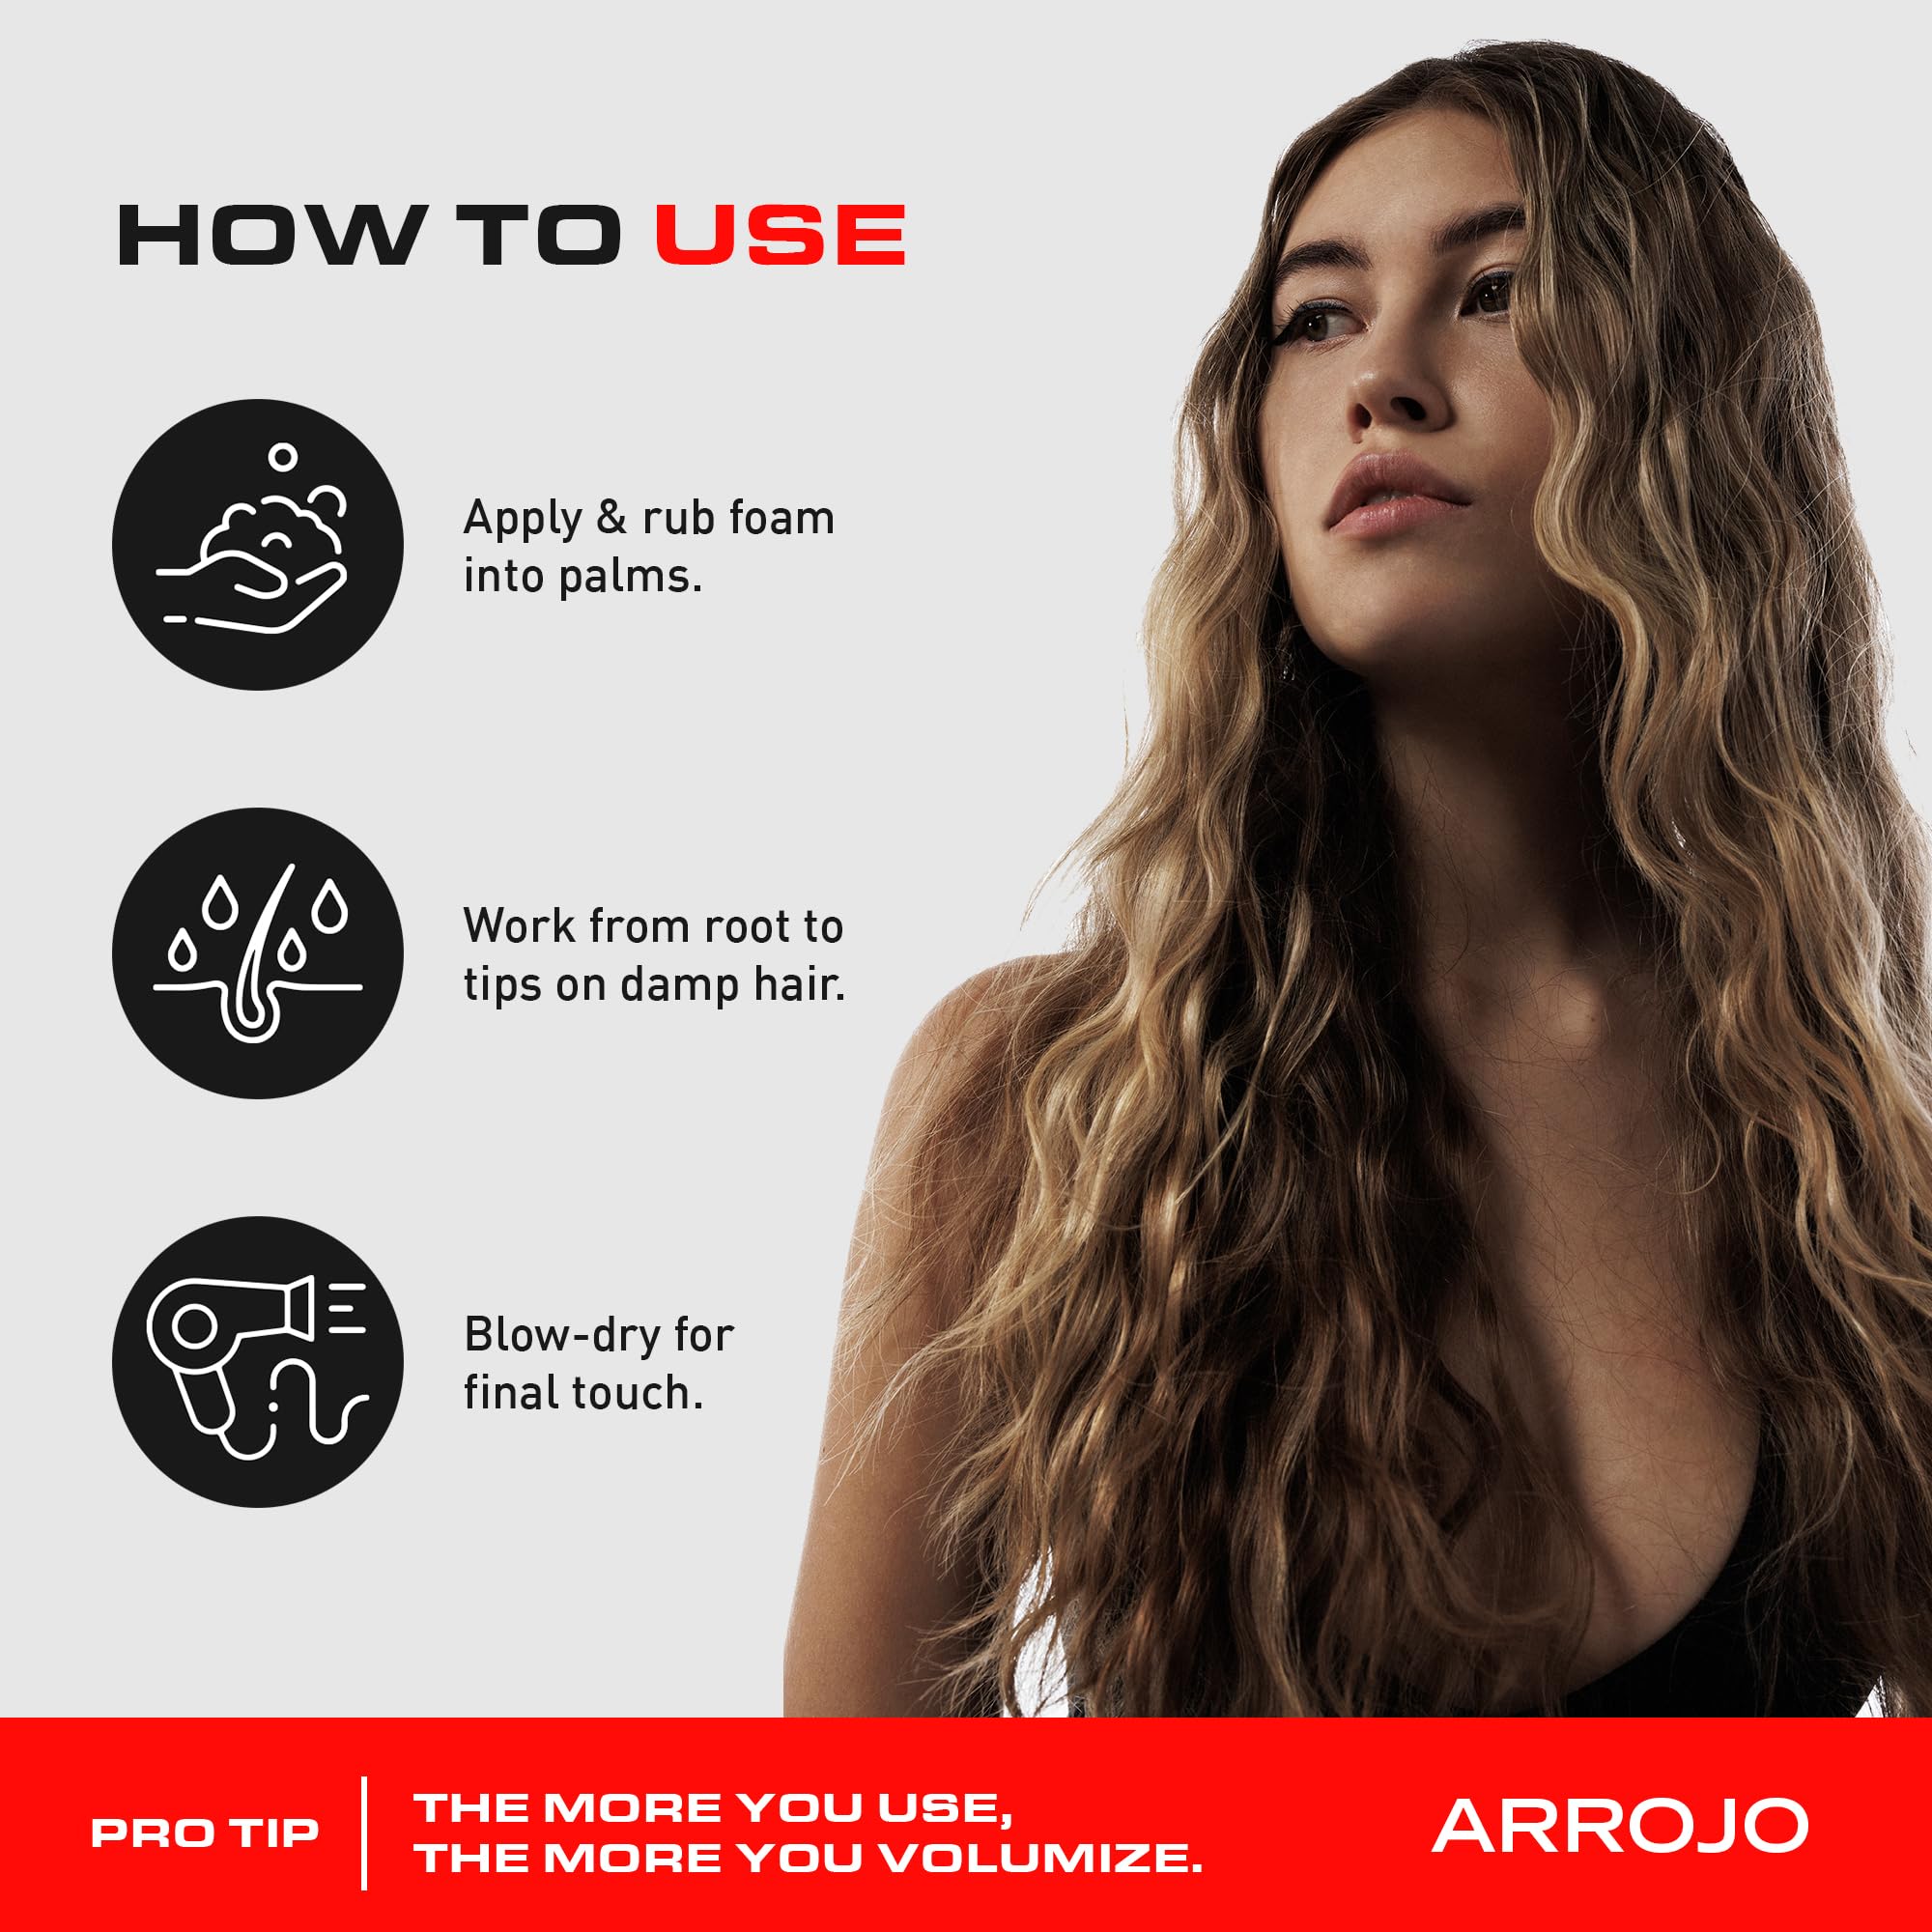 Mousse for Hair Volume - Sulfate-Free, Paraben-Free Hair Foam Mousse - Volumizing Mousse for Fine Hair with Vitamin B5, Amino Acids, & Flower Oil - Volume Booster Foam for Men & Women by Arrojo, 4.2oz